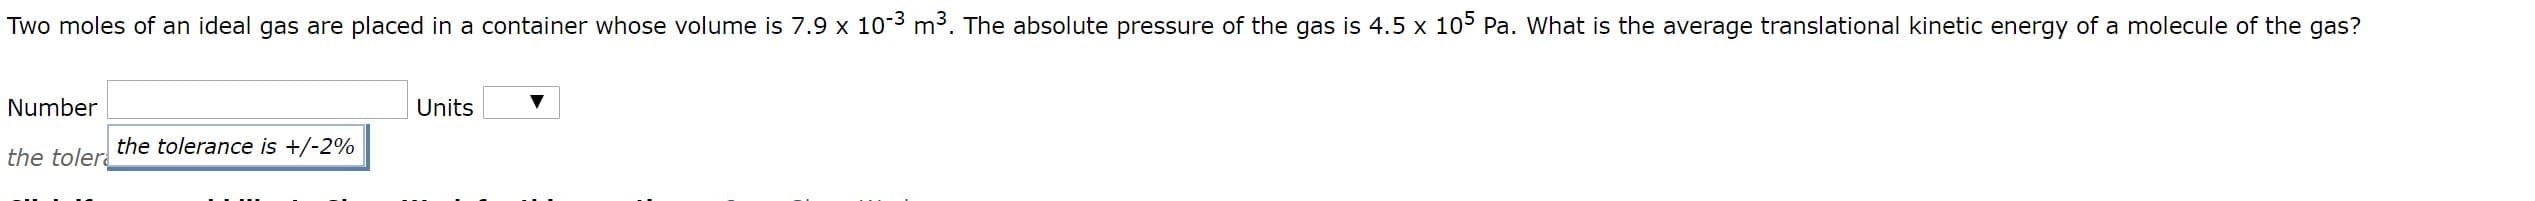 Two moles of an ideal gas are placed in a container whose volume is 7.9 x 103 m3. The absolute pressure of the gas is 4.5 x 10 Pa. What is the average translational kinetic energy of a molecule of the gas?
Number
Units
the tolerance is +/-2%
the toler
